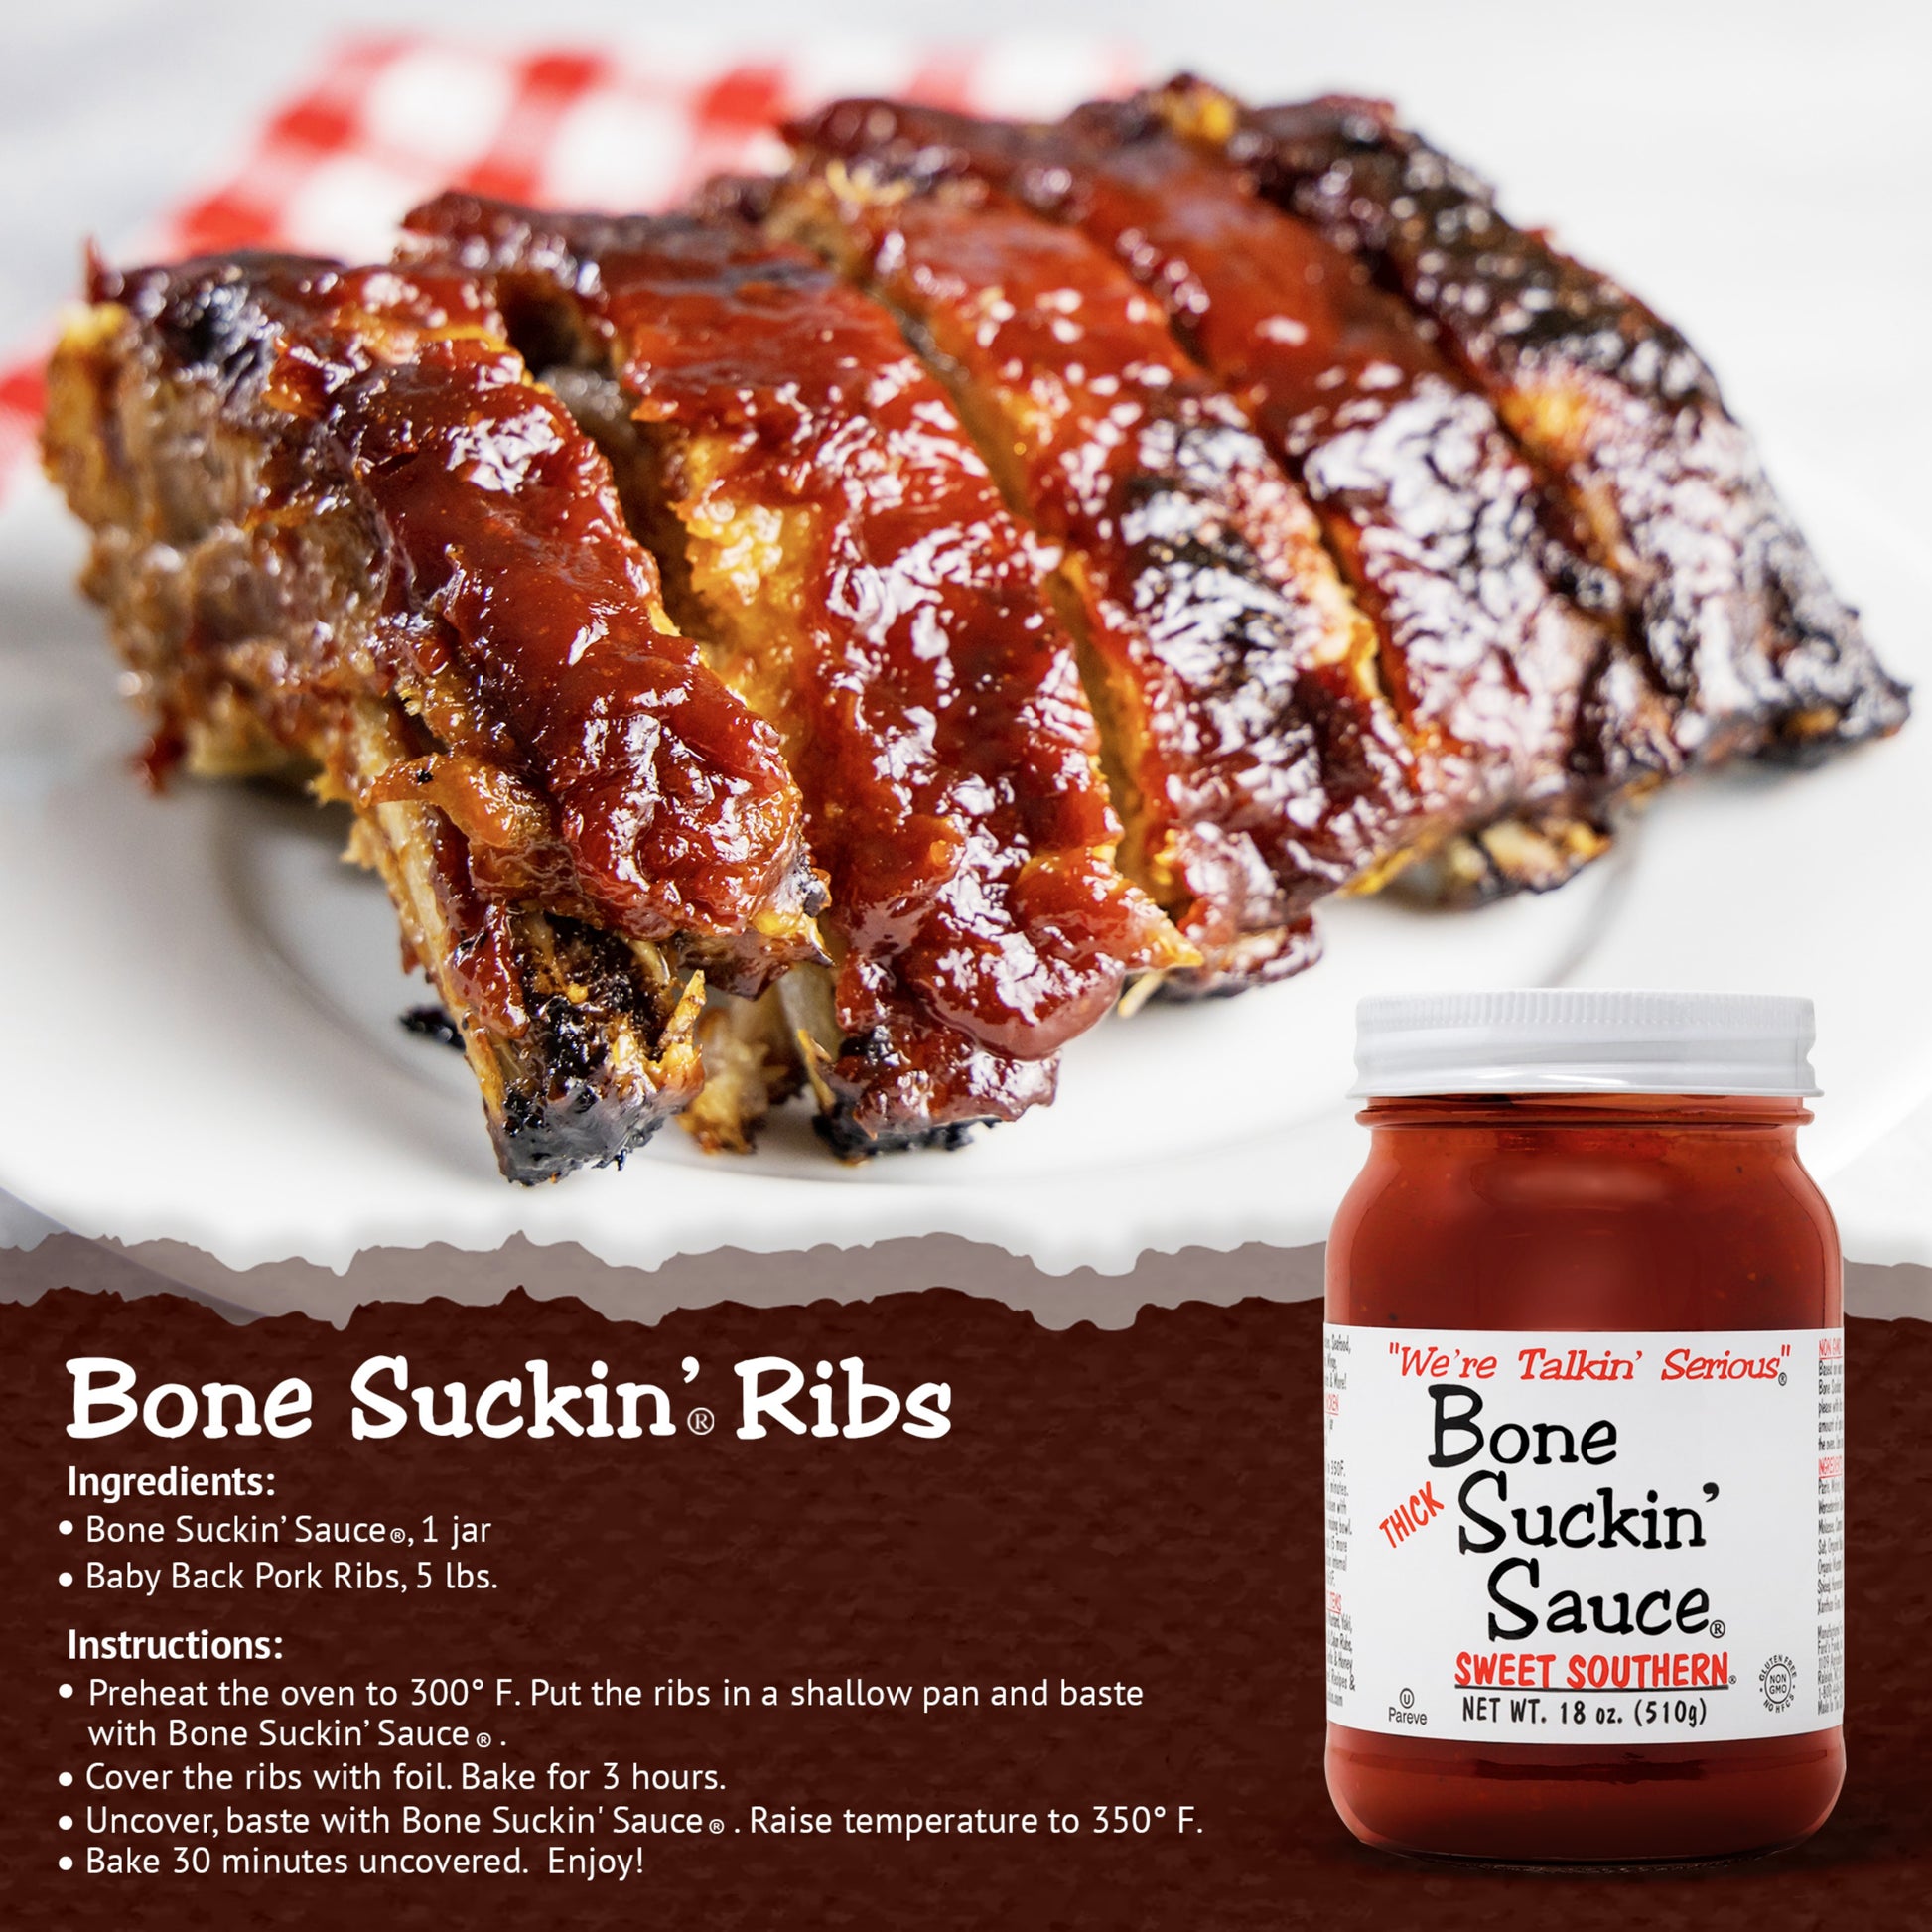 Bone Suckin’® Ribs Bone Suckin Sauce®, 1 jar Baby Back Pork Ribs, 5 lbs. Preheat oven to 300 degrees. Put ribs in shallow pan and baste with sauce. Cover ribs with foil. Bake 3 hours. Uncover, baste with Sauce. Raise temperature to 350 degrees. Bake 30 minutes uncovered. (Bone Suckin' OJ Ribs Recipe at BoneSuckin.com)